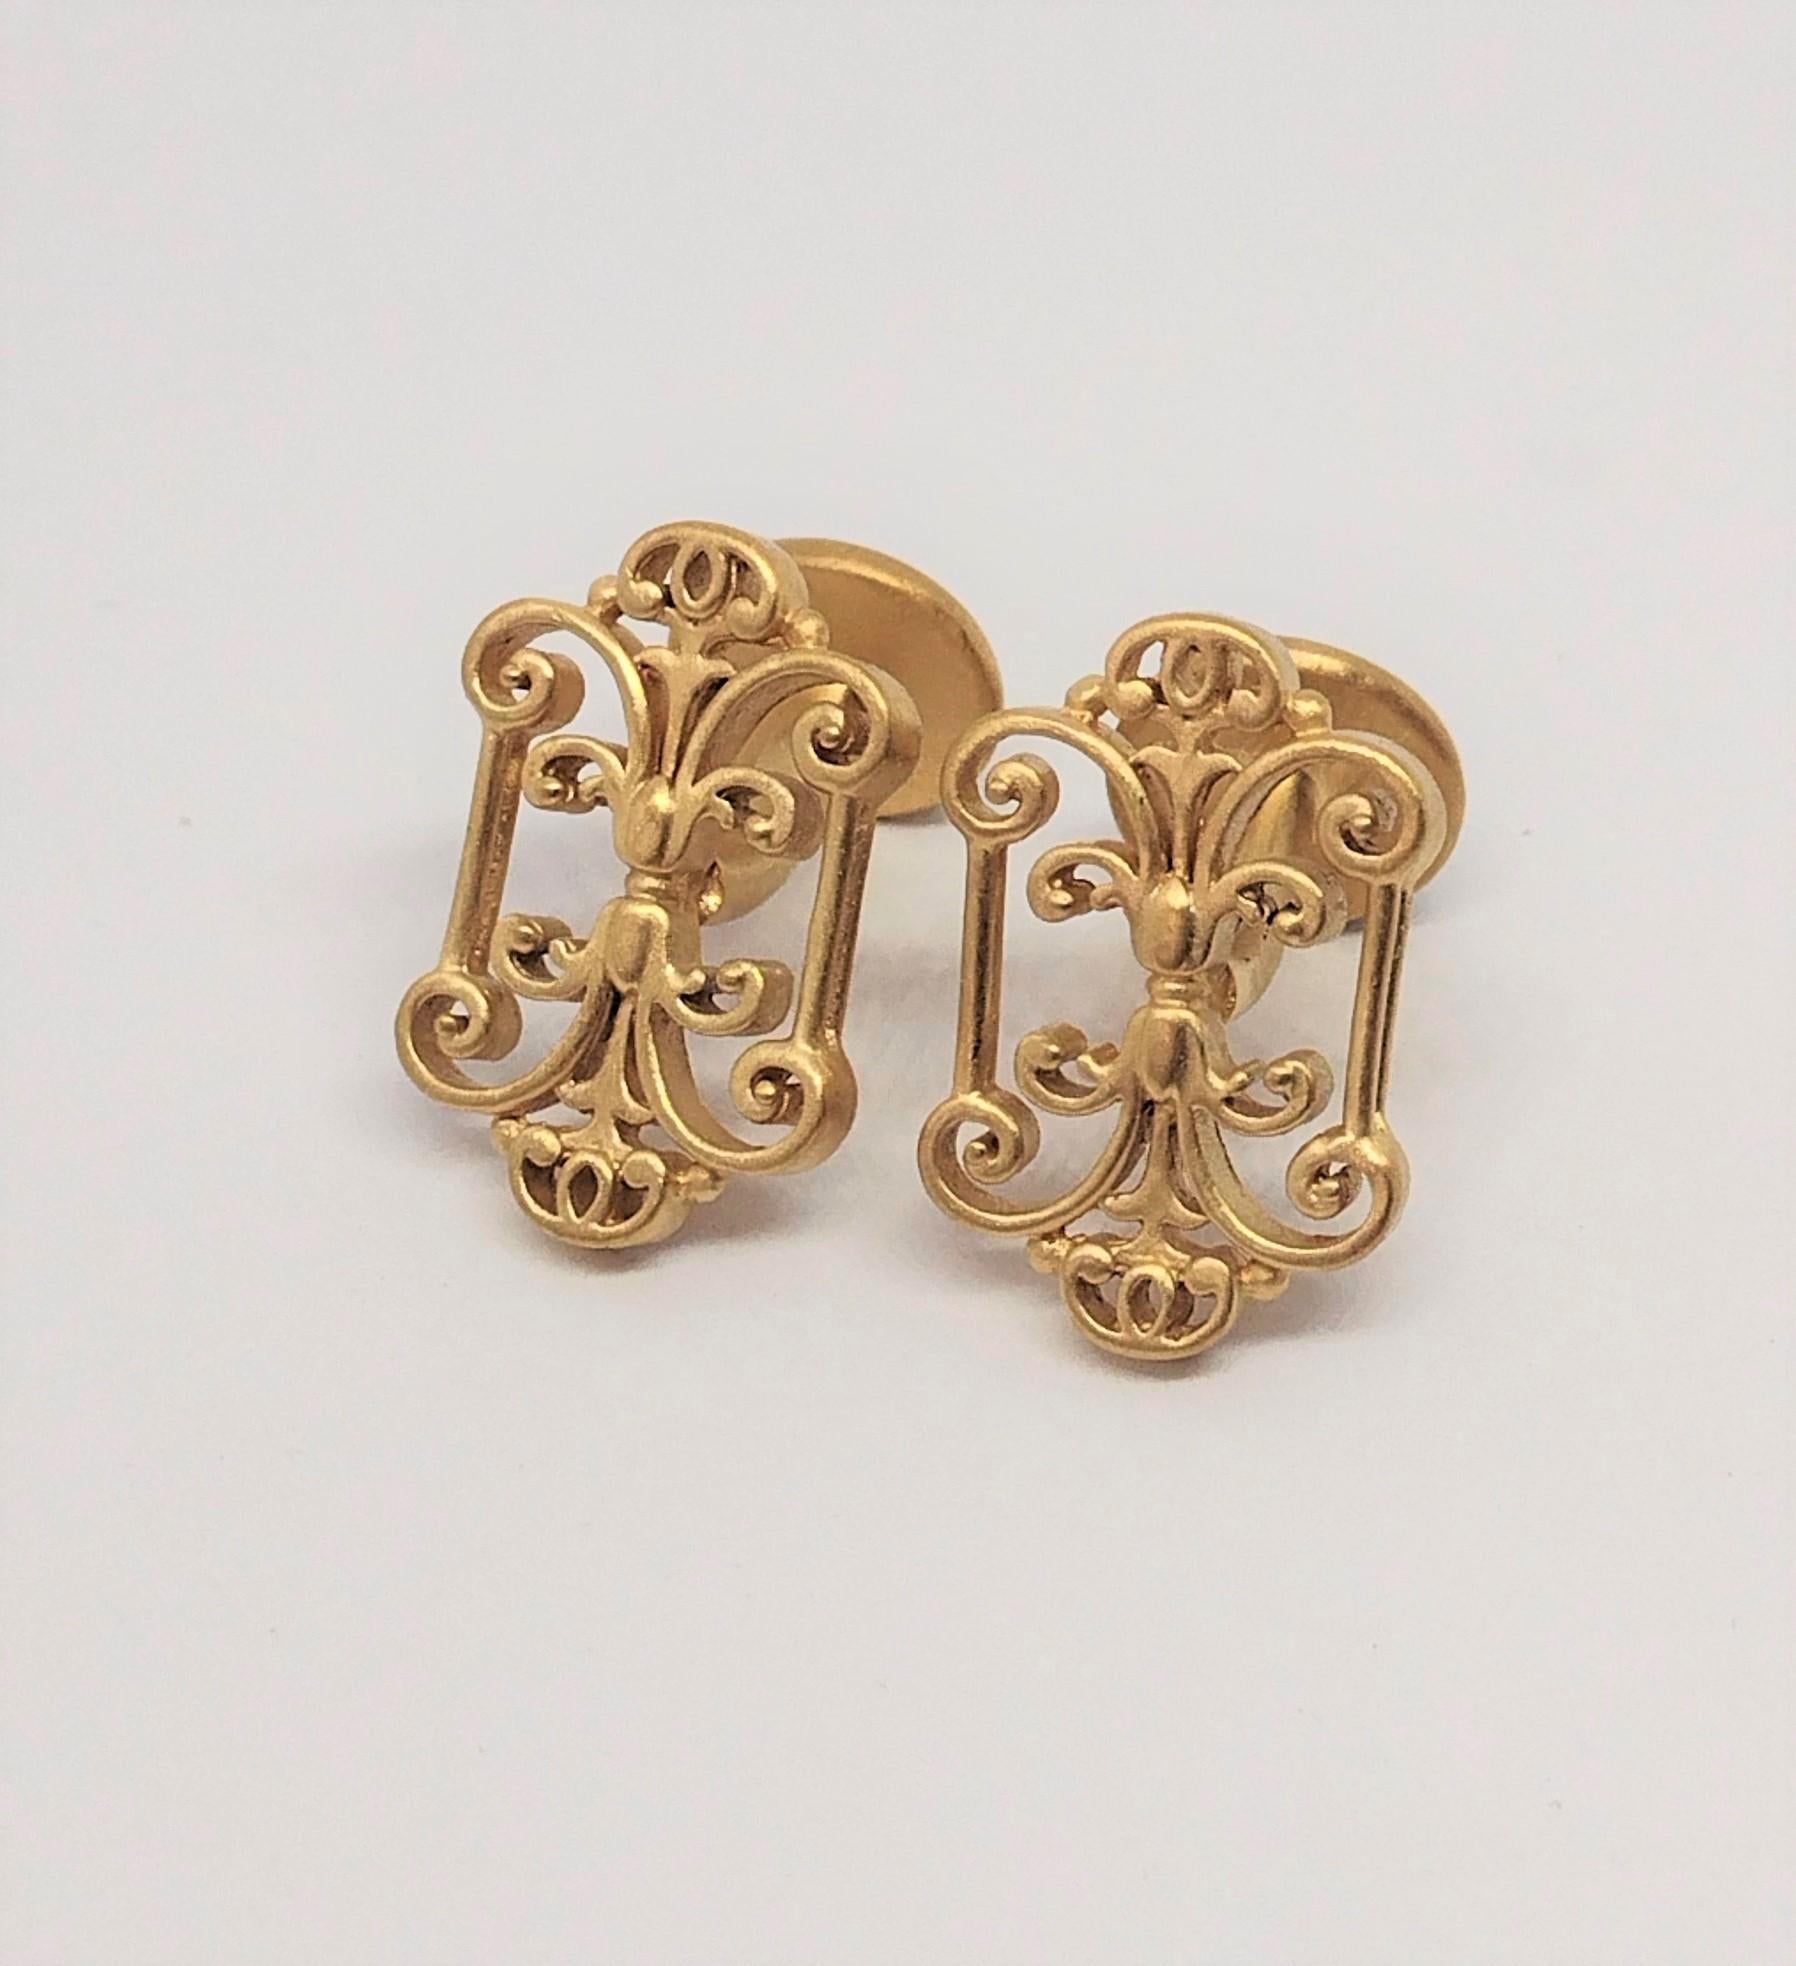 18 Karat Yellow Gold French Gate Cufflinks , This is a series for cufflinks from my travels. Photographs of iron and bronze gates, fences,and windows. The lost art of decorative hand wrought metal work. These are matte and polished  22 mm x 14 x 3